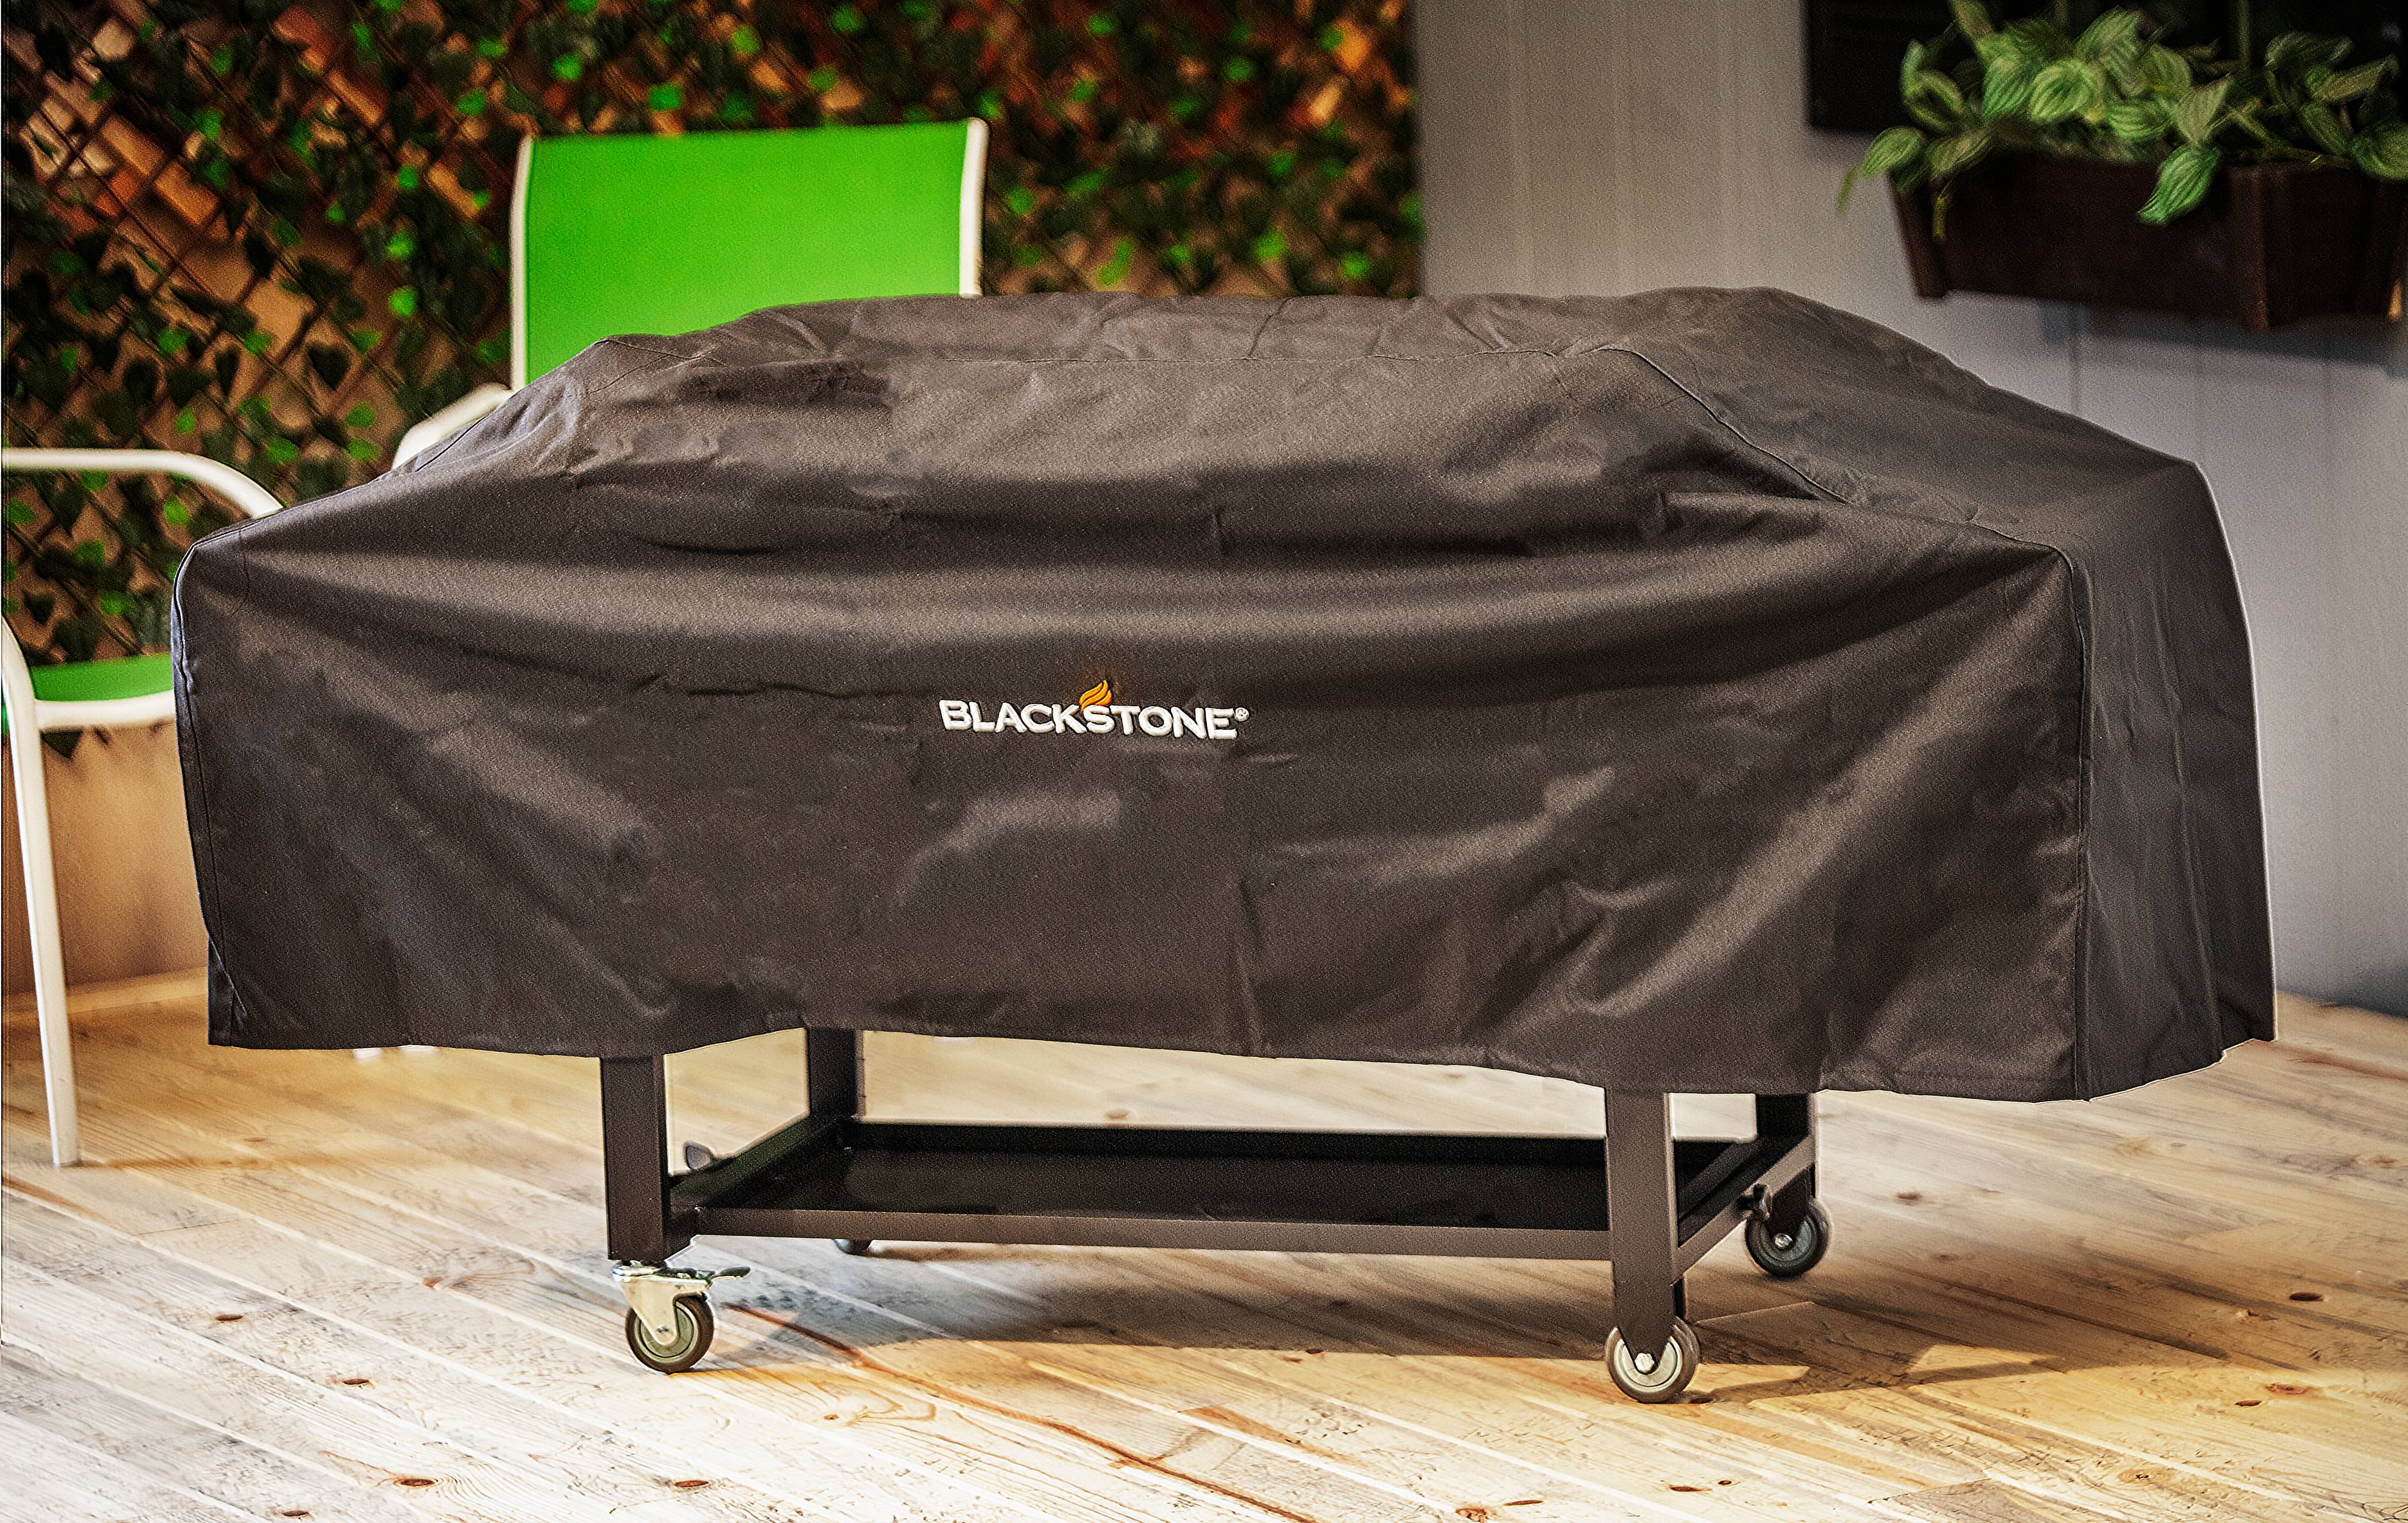 Limited Edition Blackstone Heavy Duty Grill Cover 36 inch Griddle 